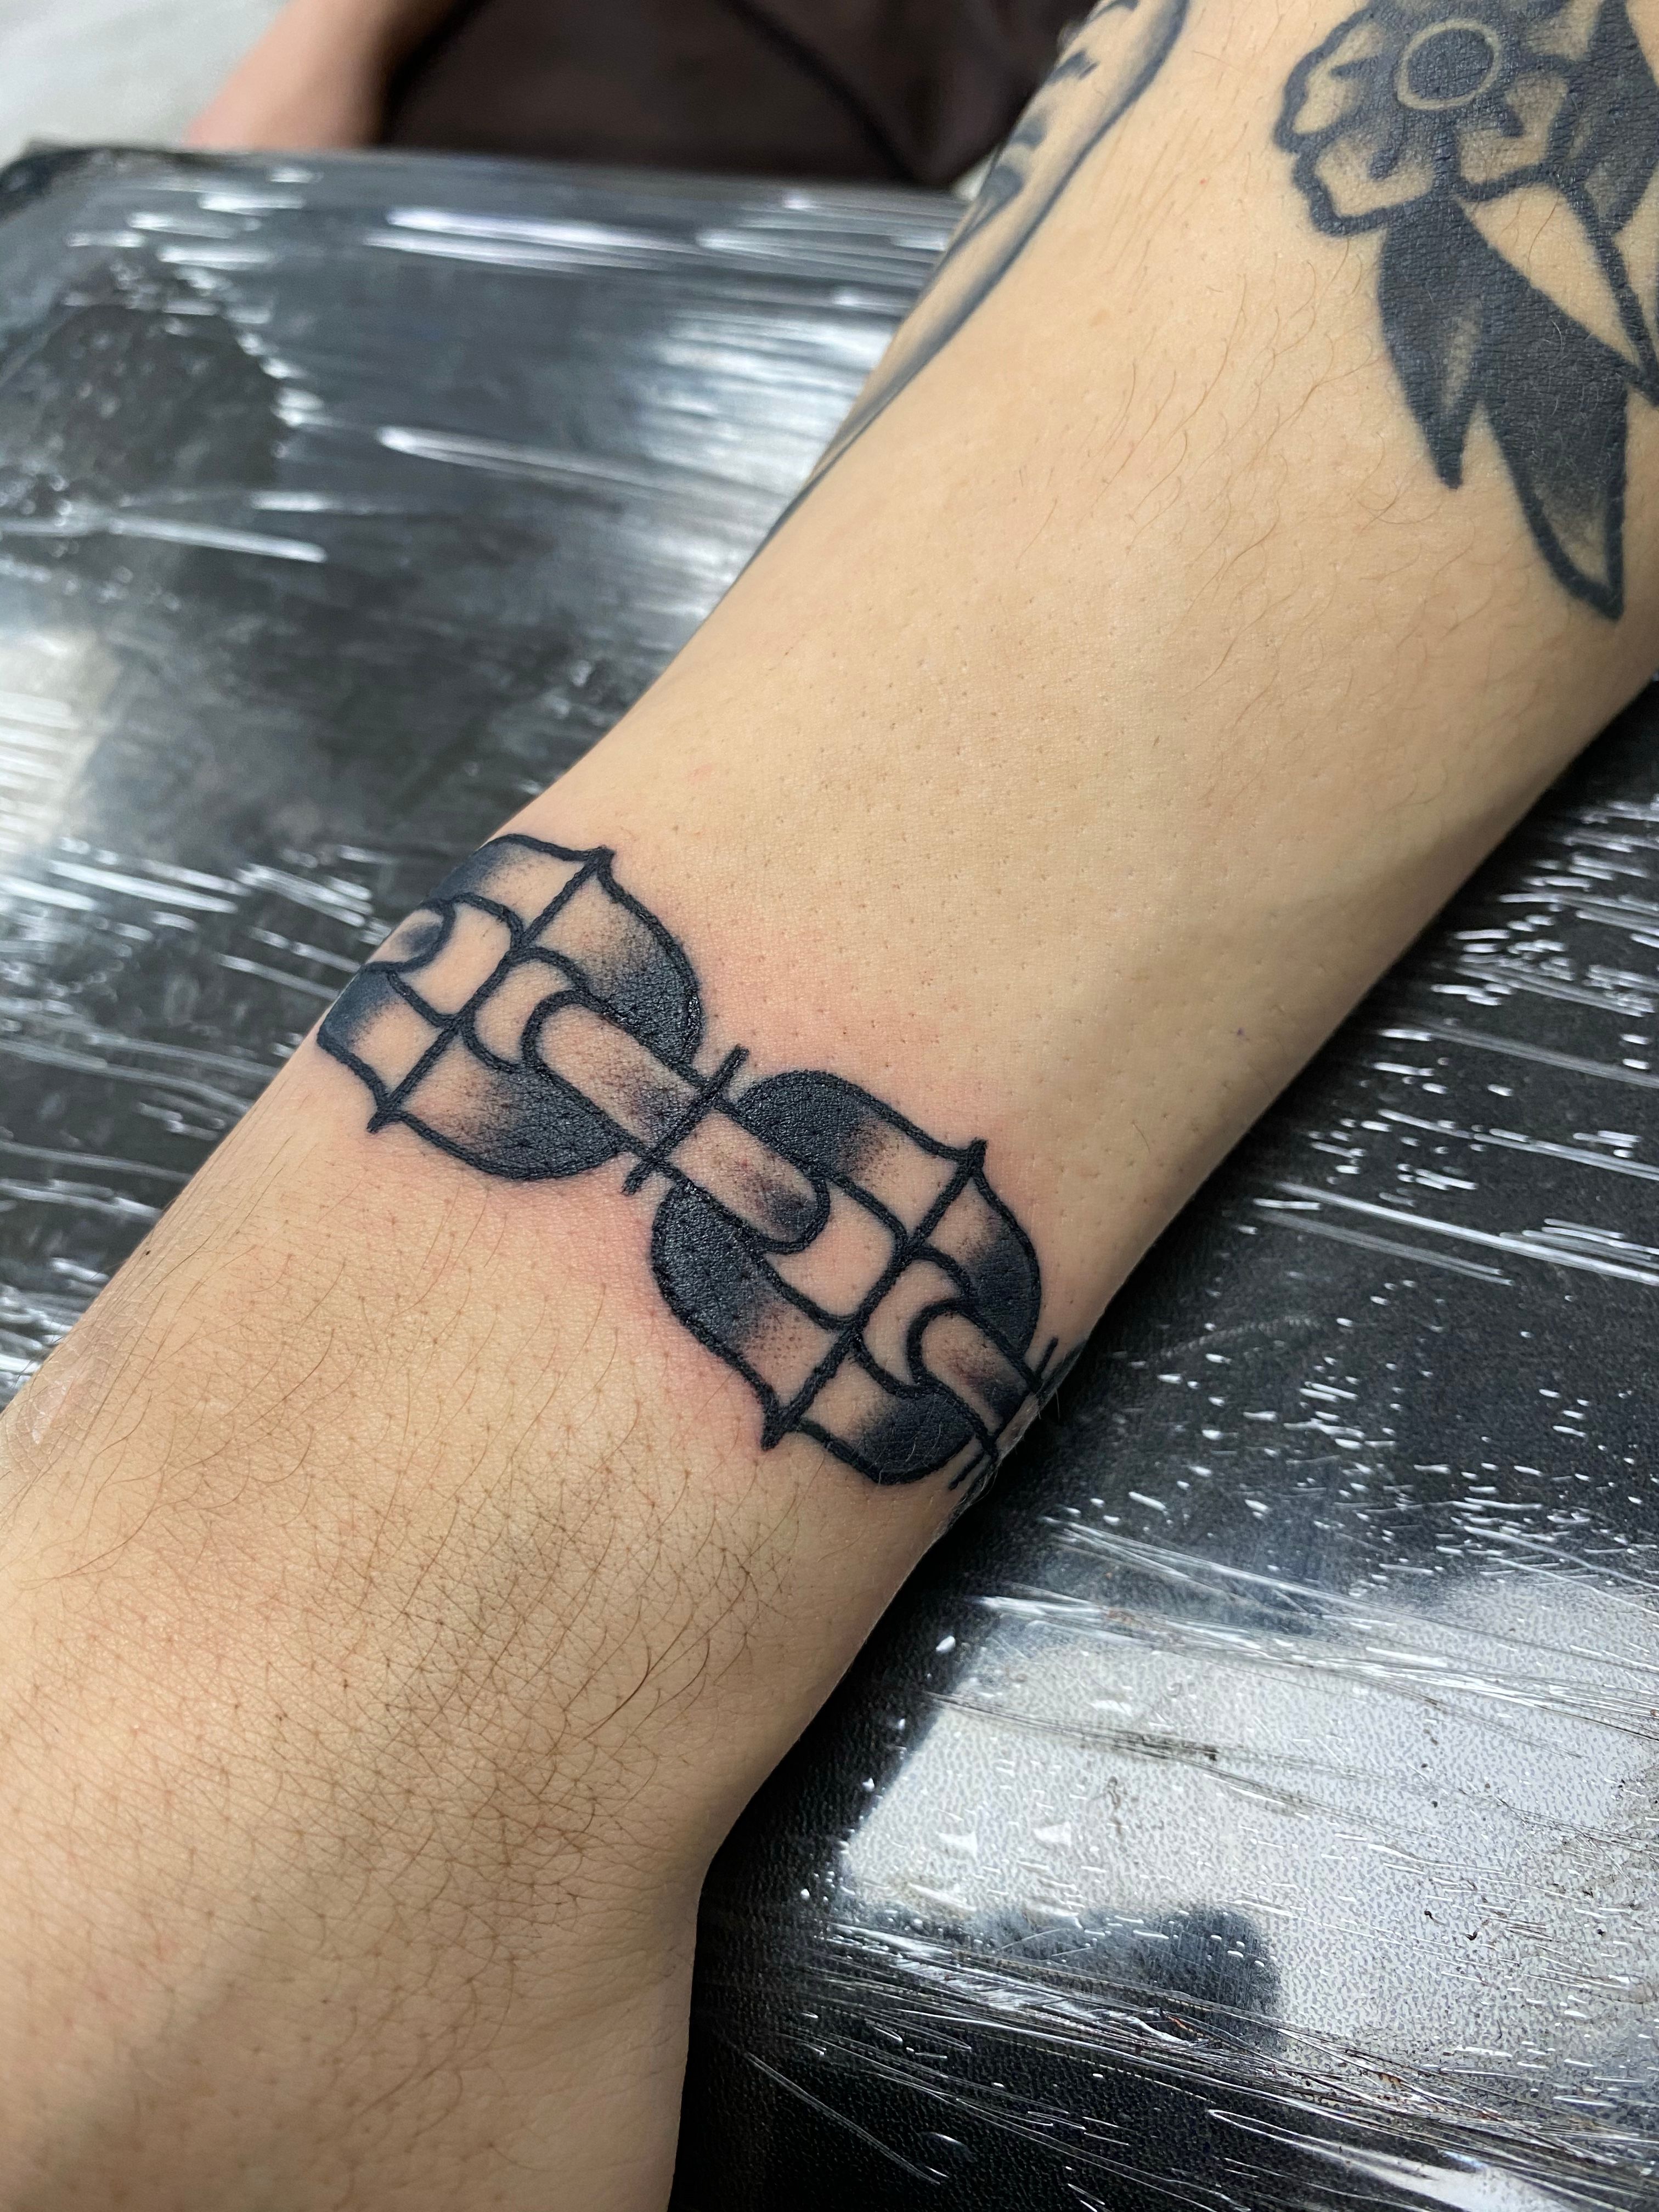 Share 88 about hand chain tattoo latest  indaotaonec